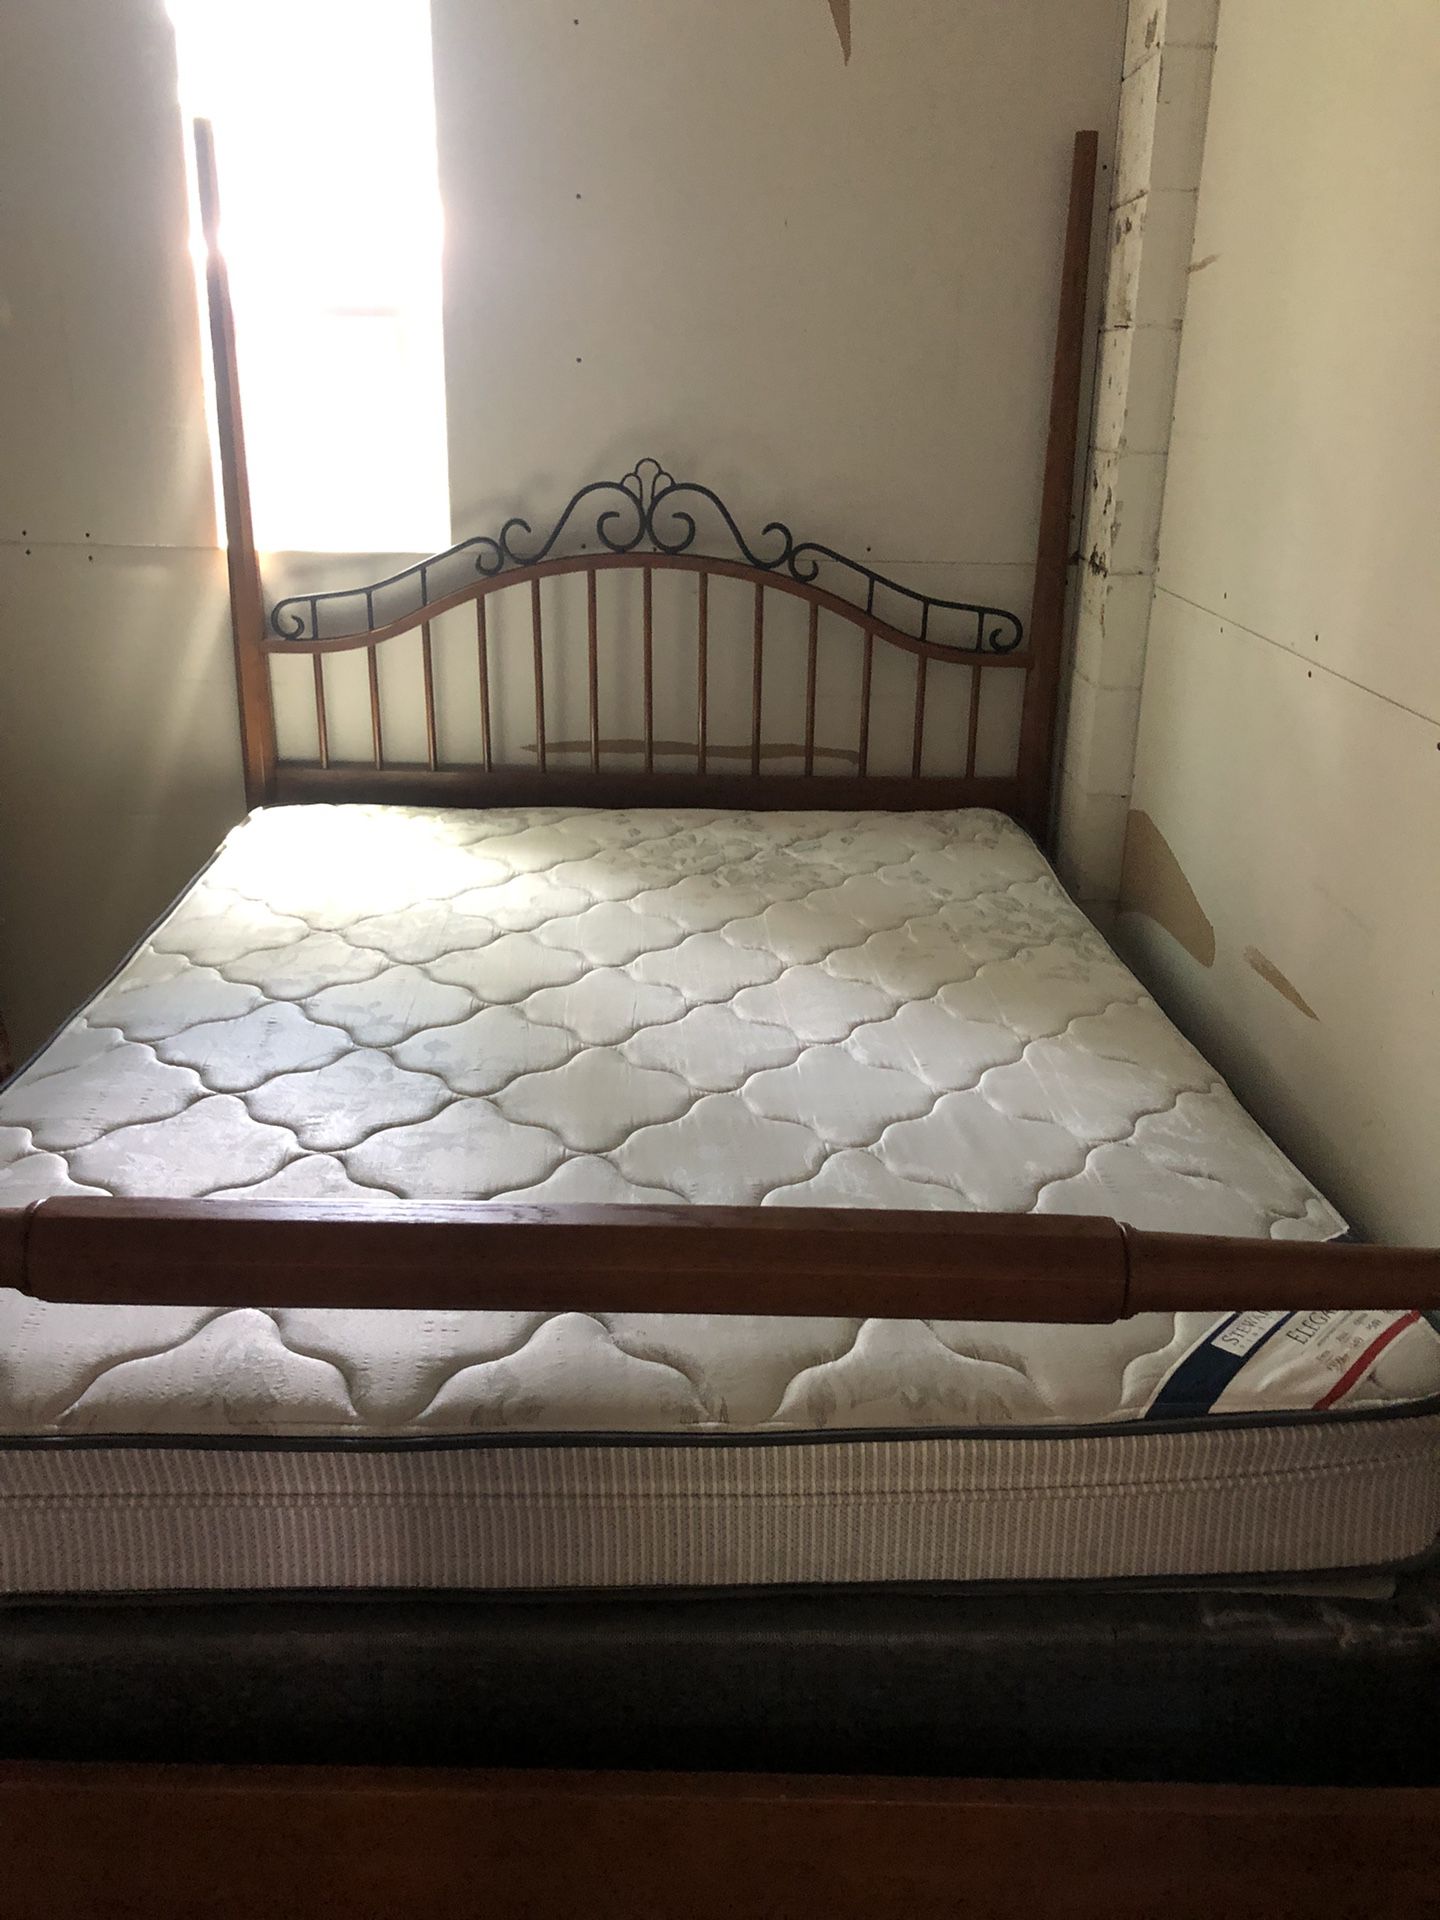 Queen Size Bed for sale 